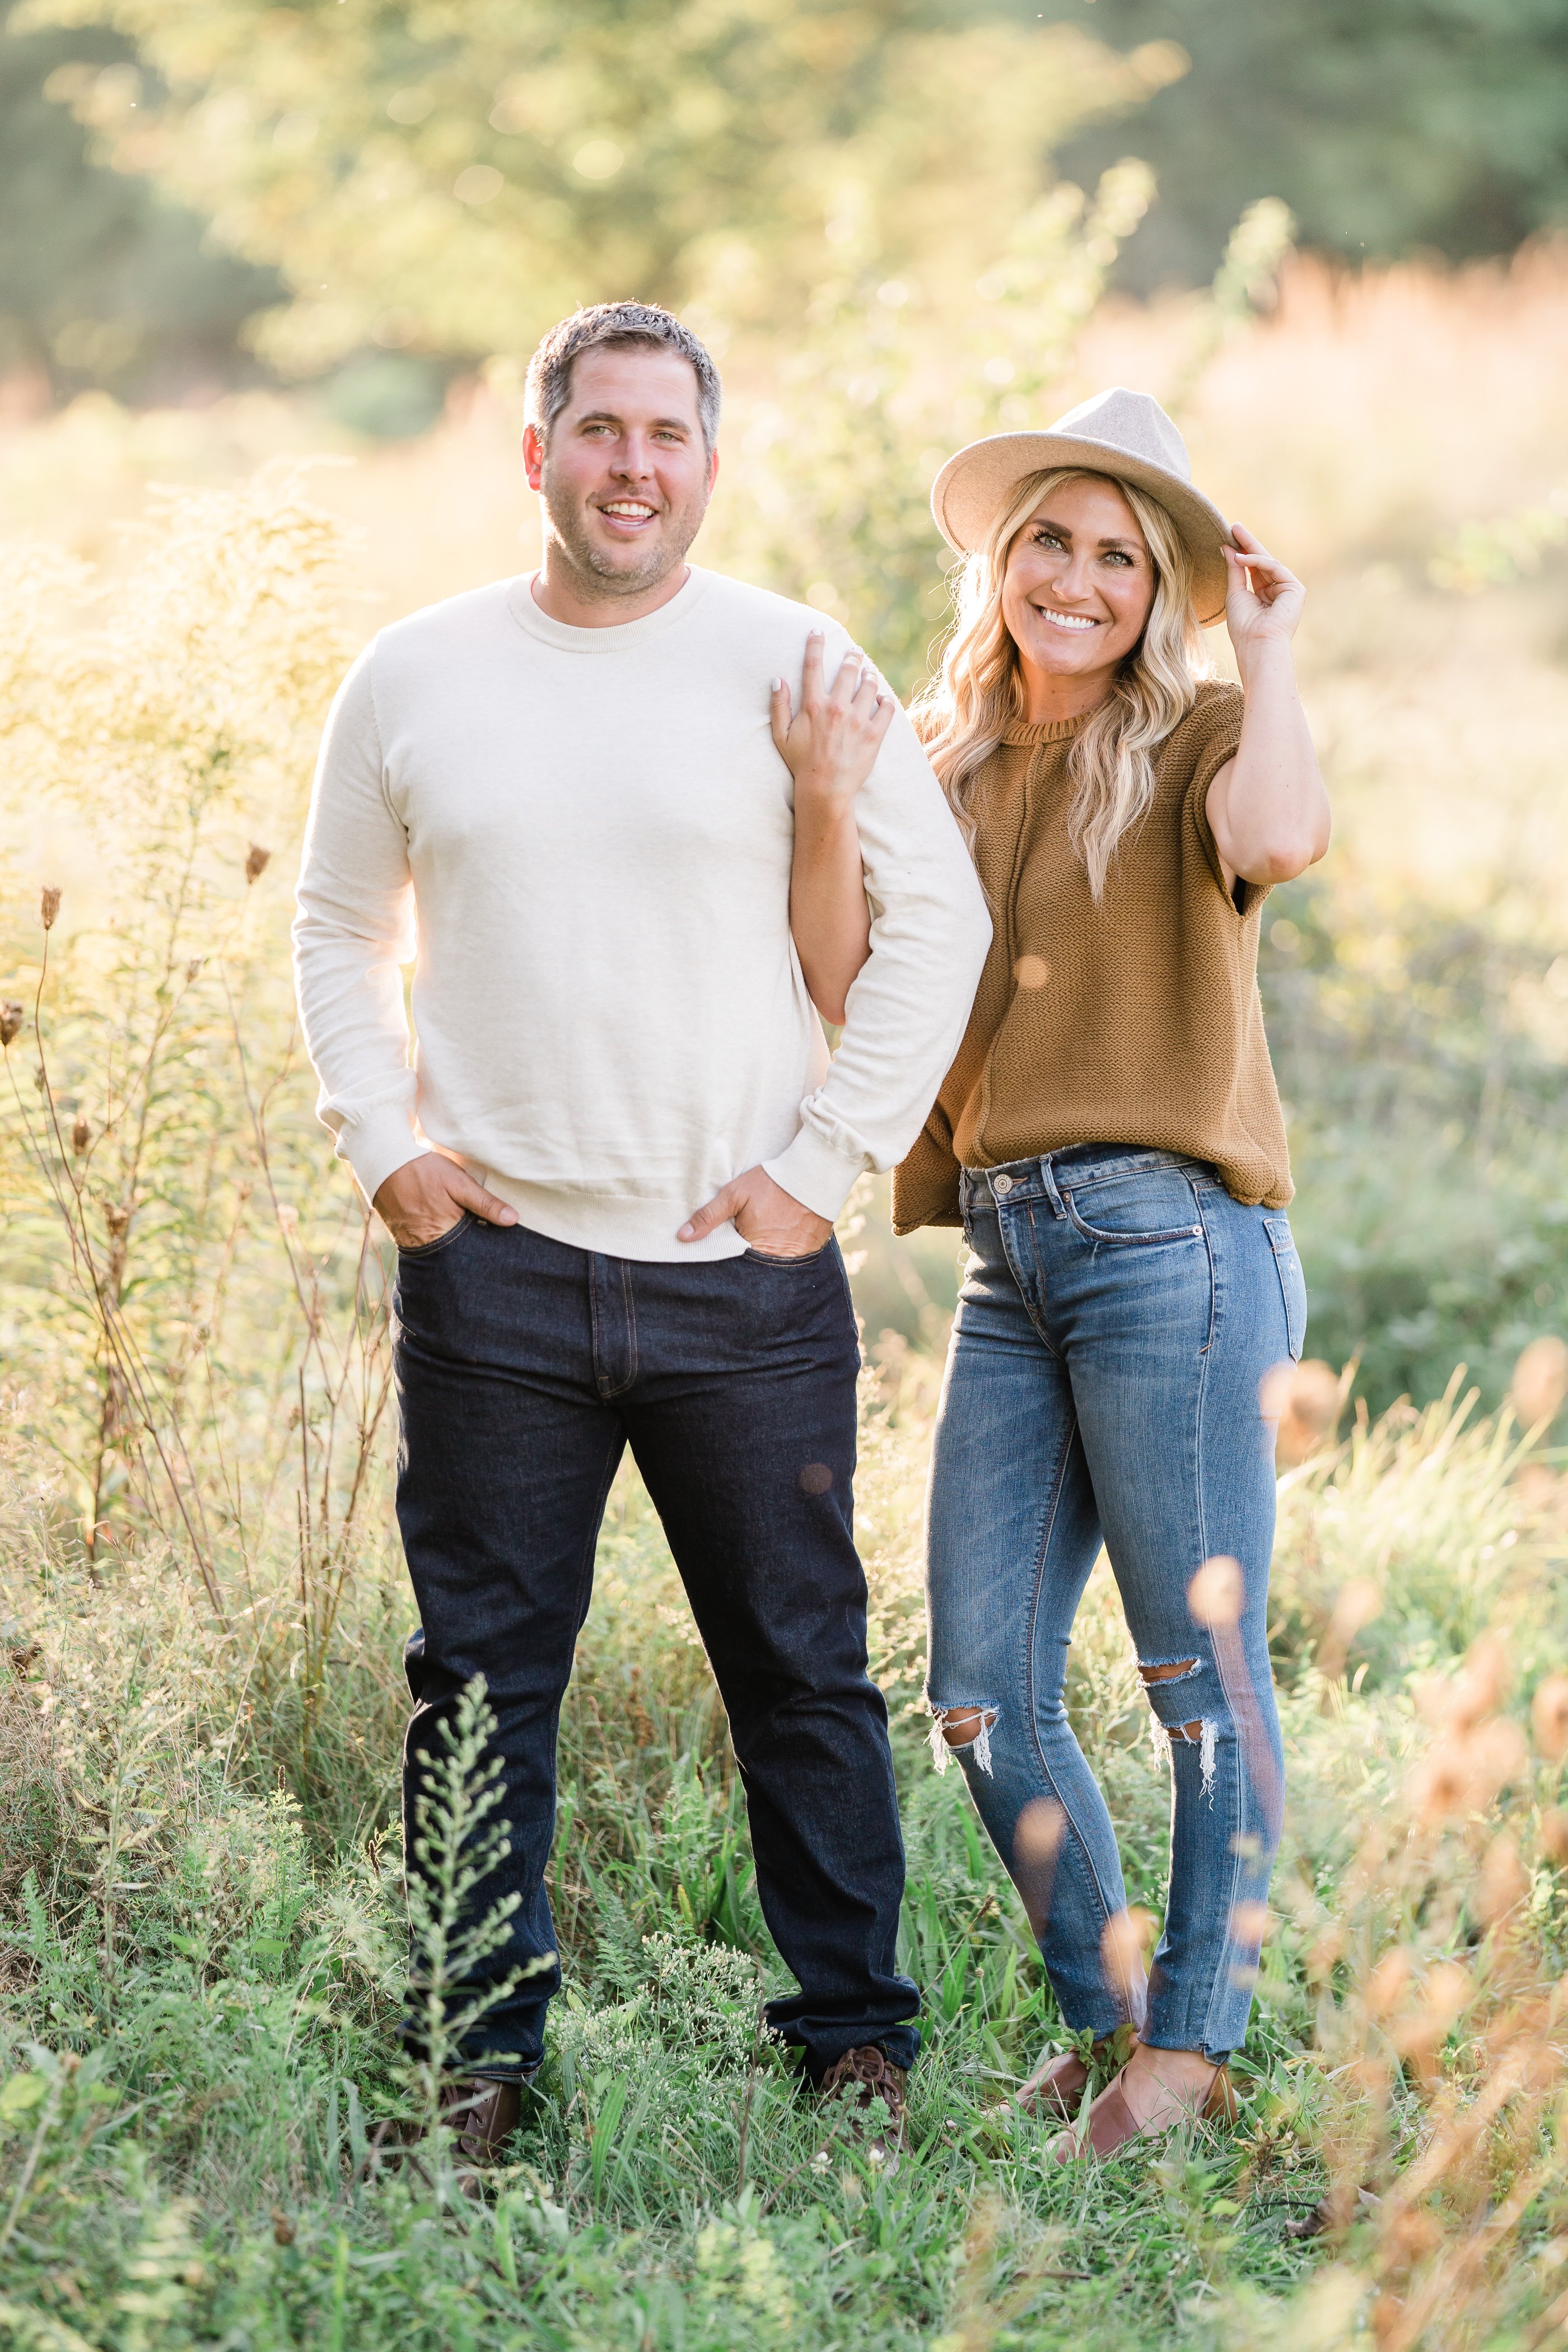 summer engagement photos with man and woman standing together in a field at sunset captured by Fort Wayne wedding photographers